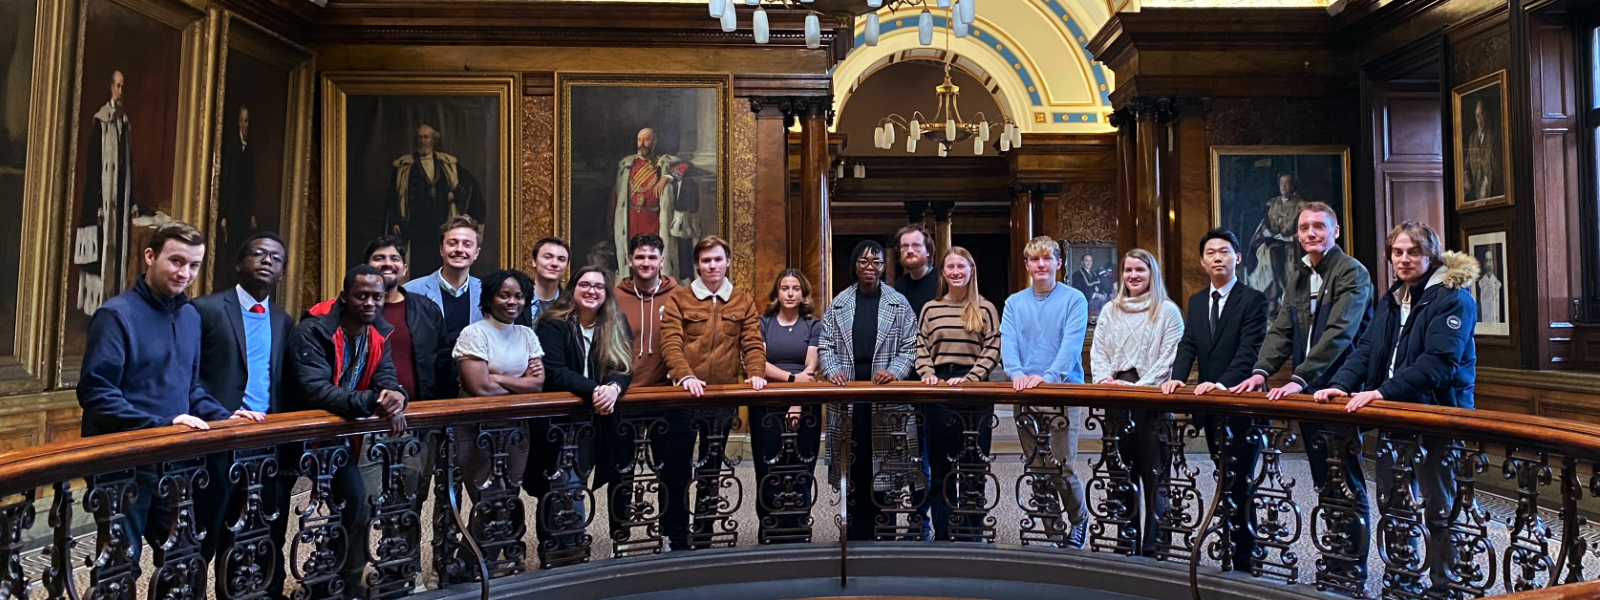 A group of students pose in a photo at Glasgow CIty Chambers